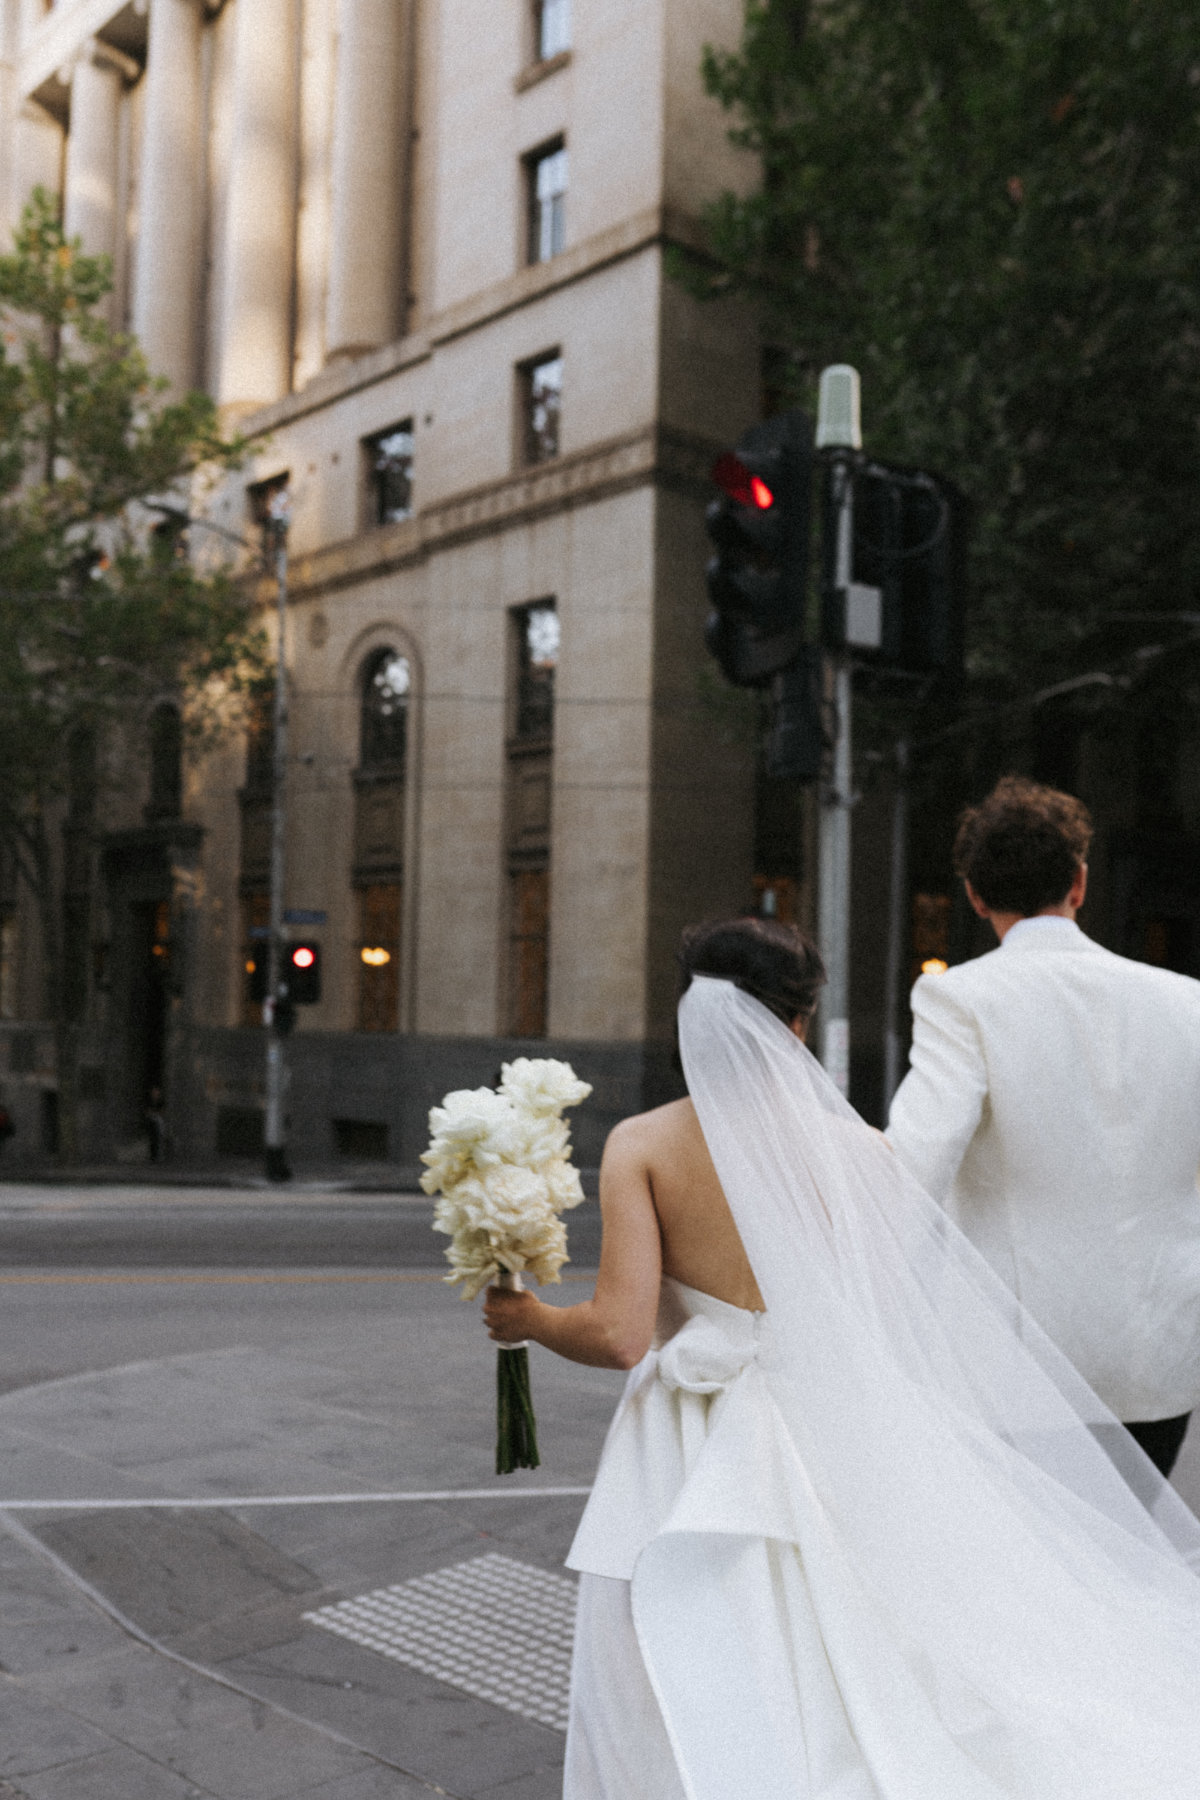 Gab and Symon's wedding at The Trust Melbourne captured by Art of Grace